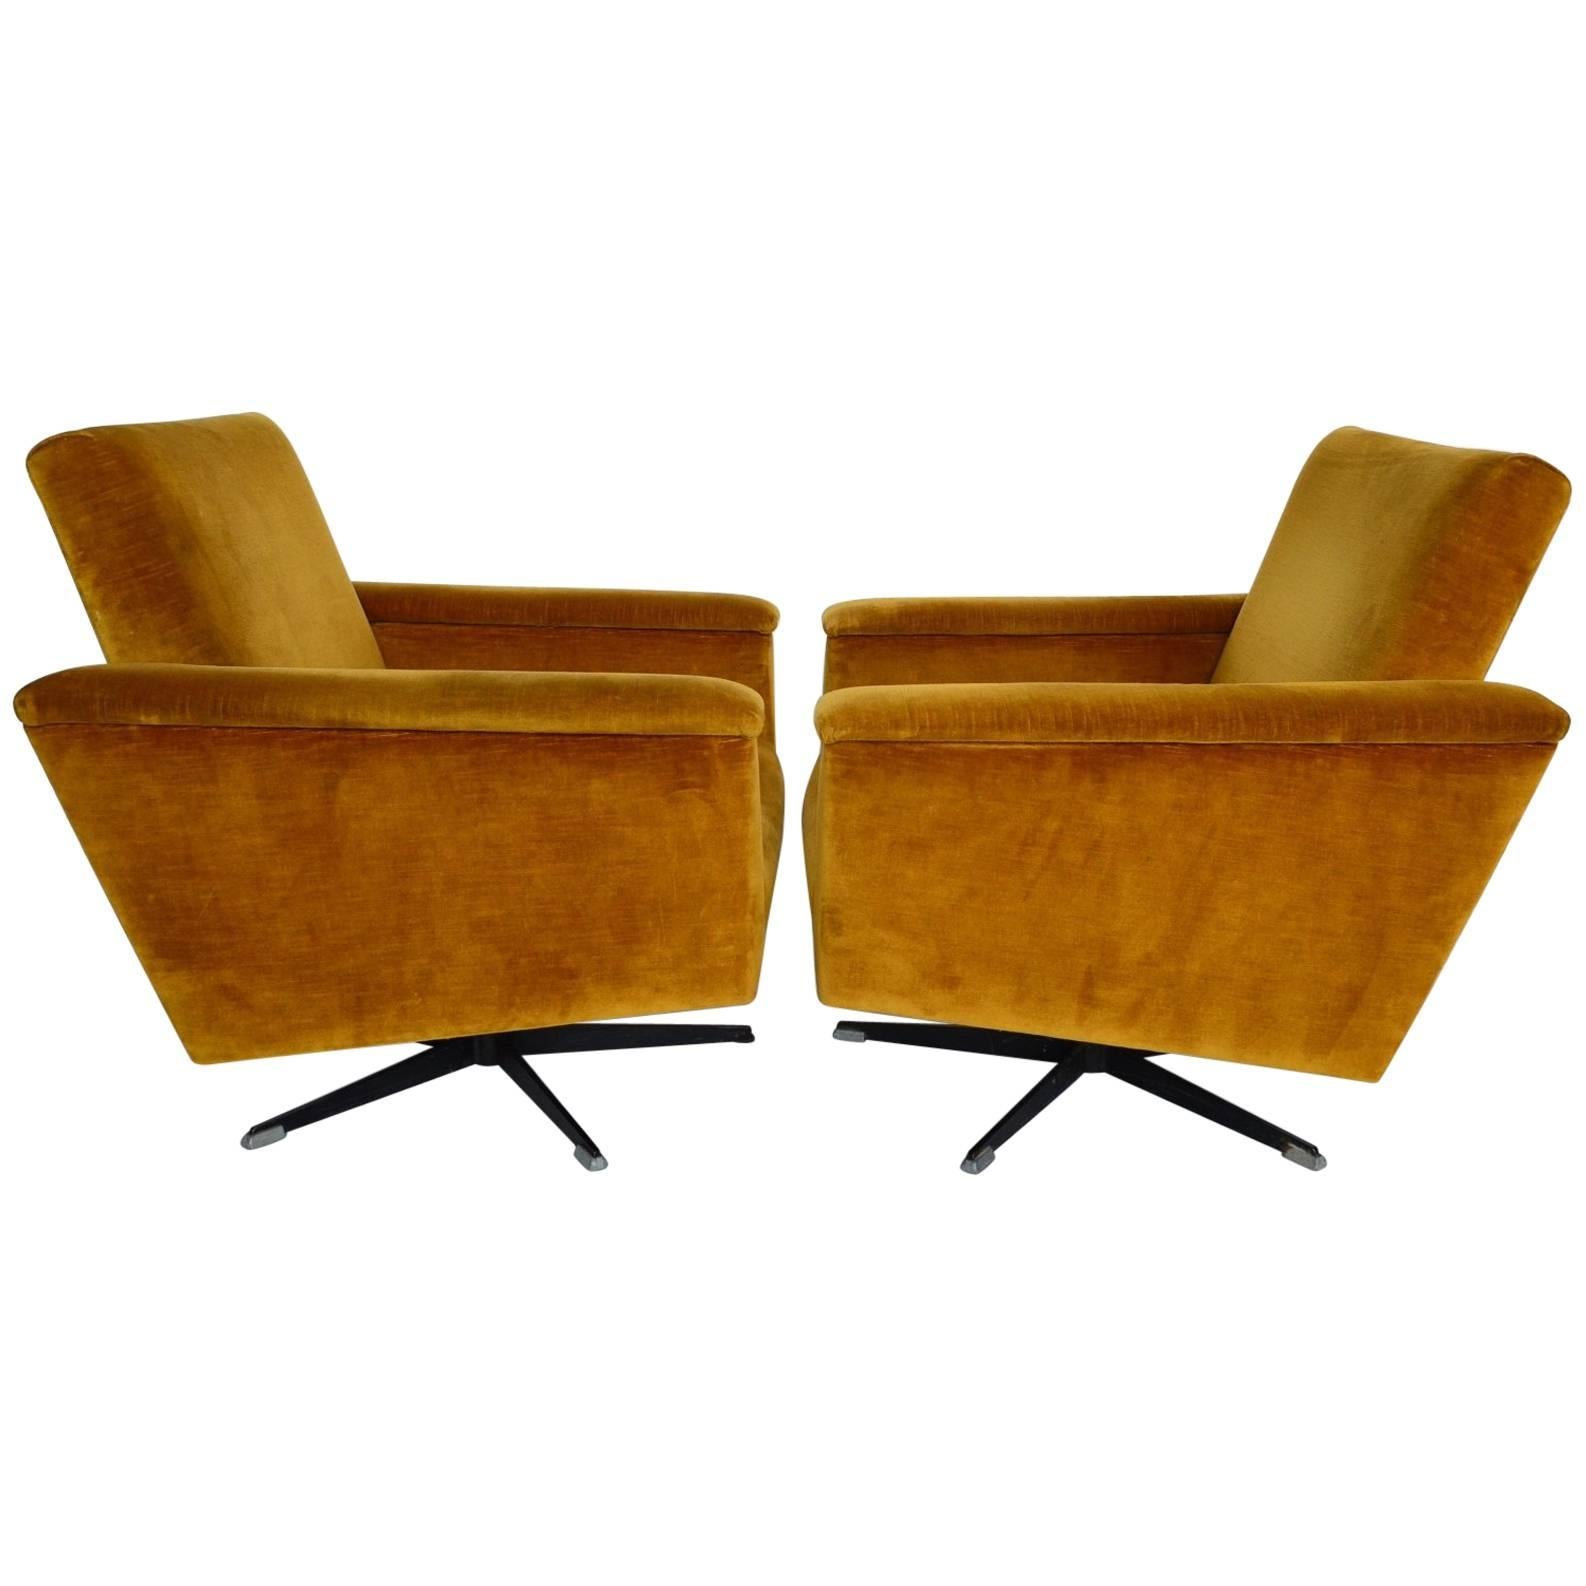 Swiss Mid-Century Men's Swivel Club Chairs or Lounge Chairs in Velvet, 1960s